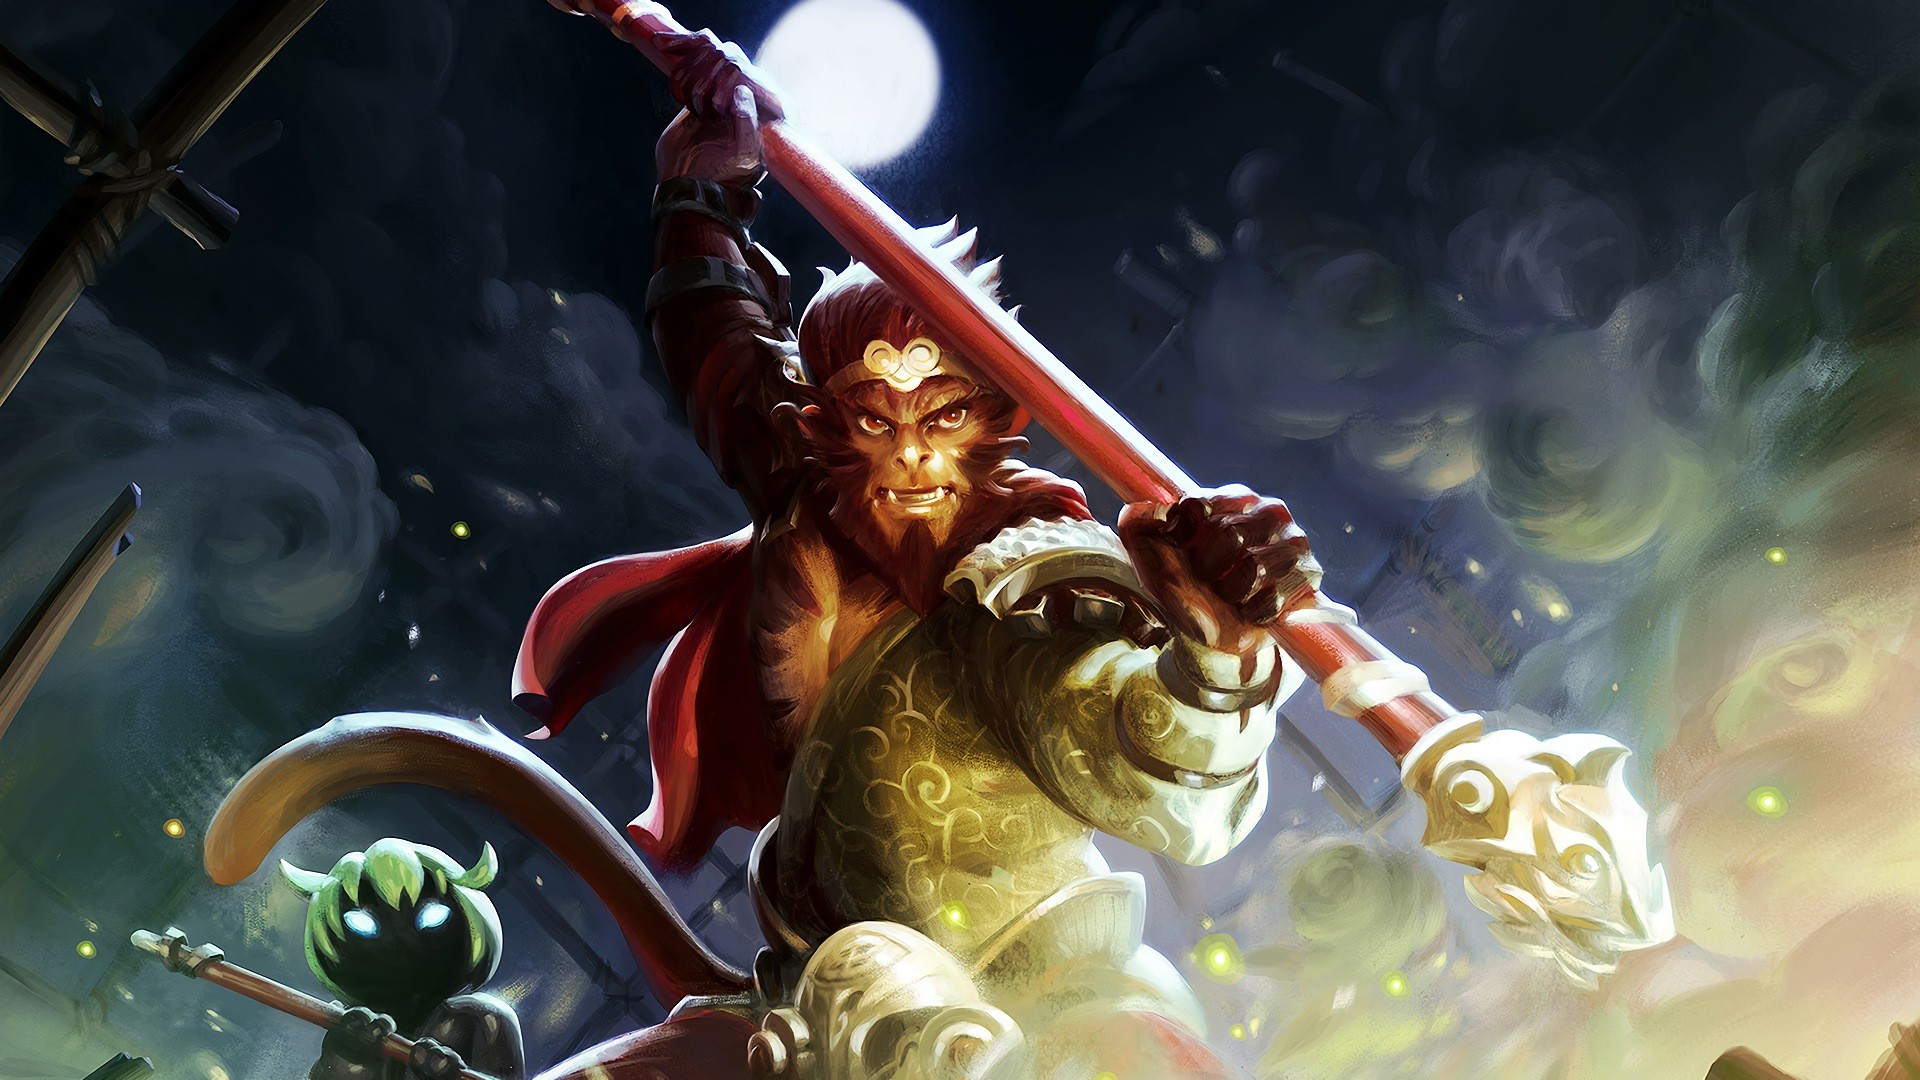 Wallpaper Monkey king, Defense of The Ancients 2, DOTA 2 video game, gaming